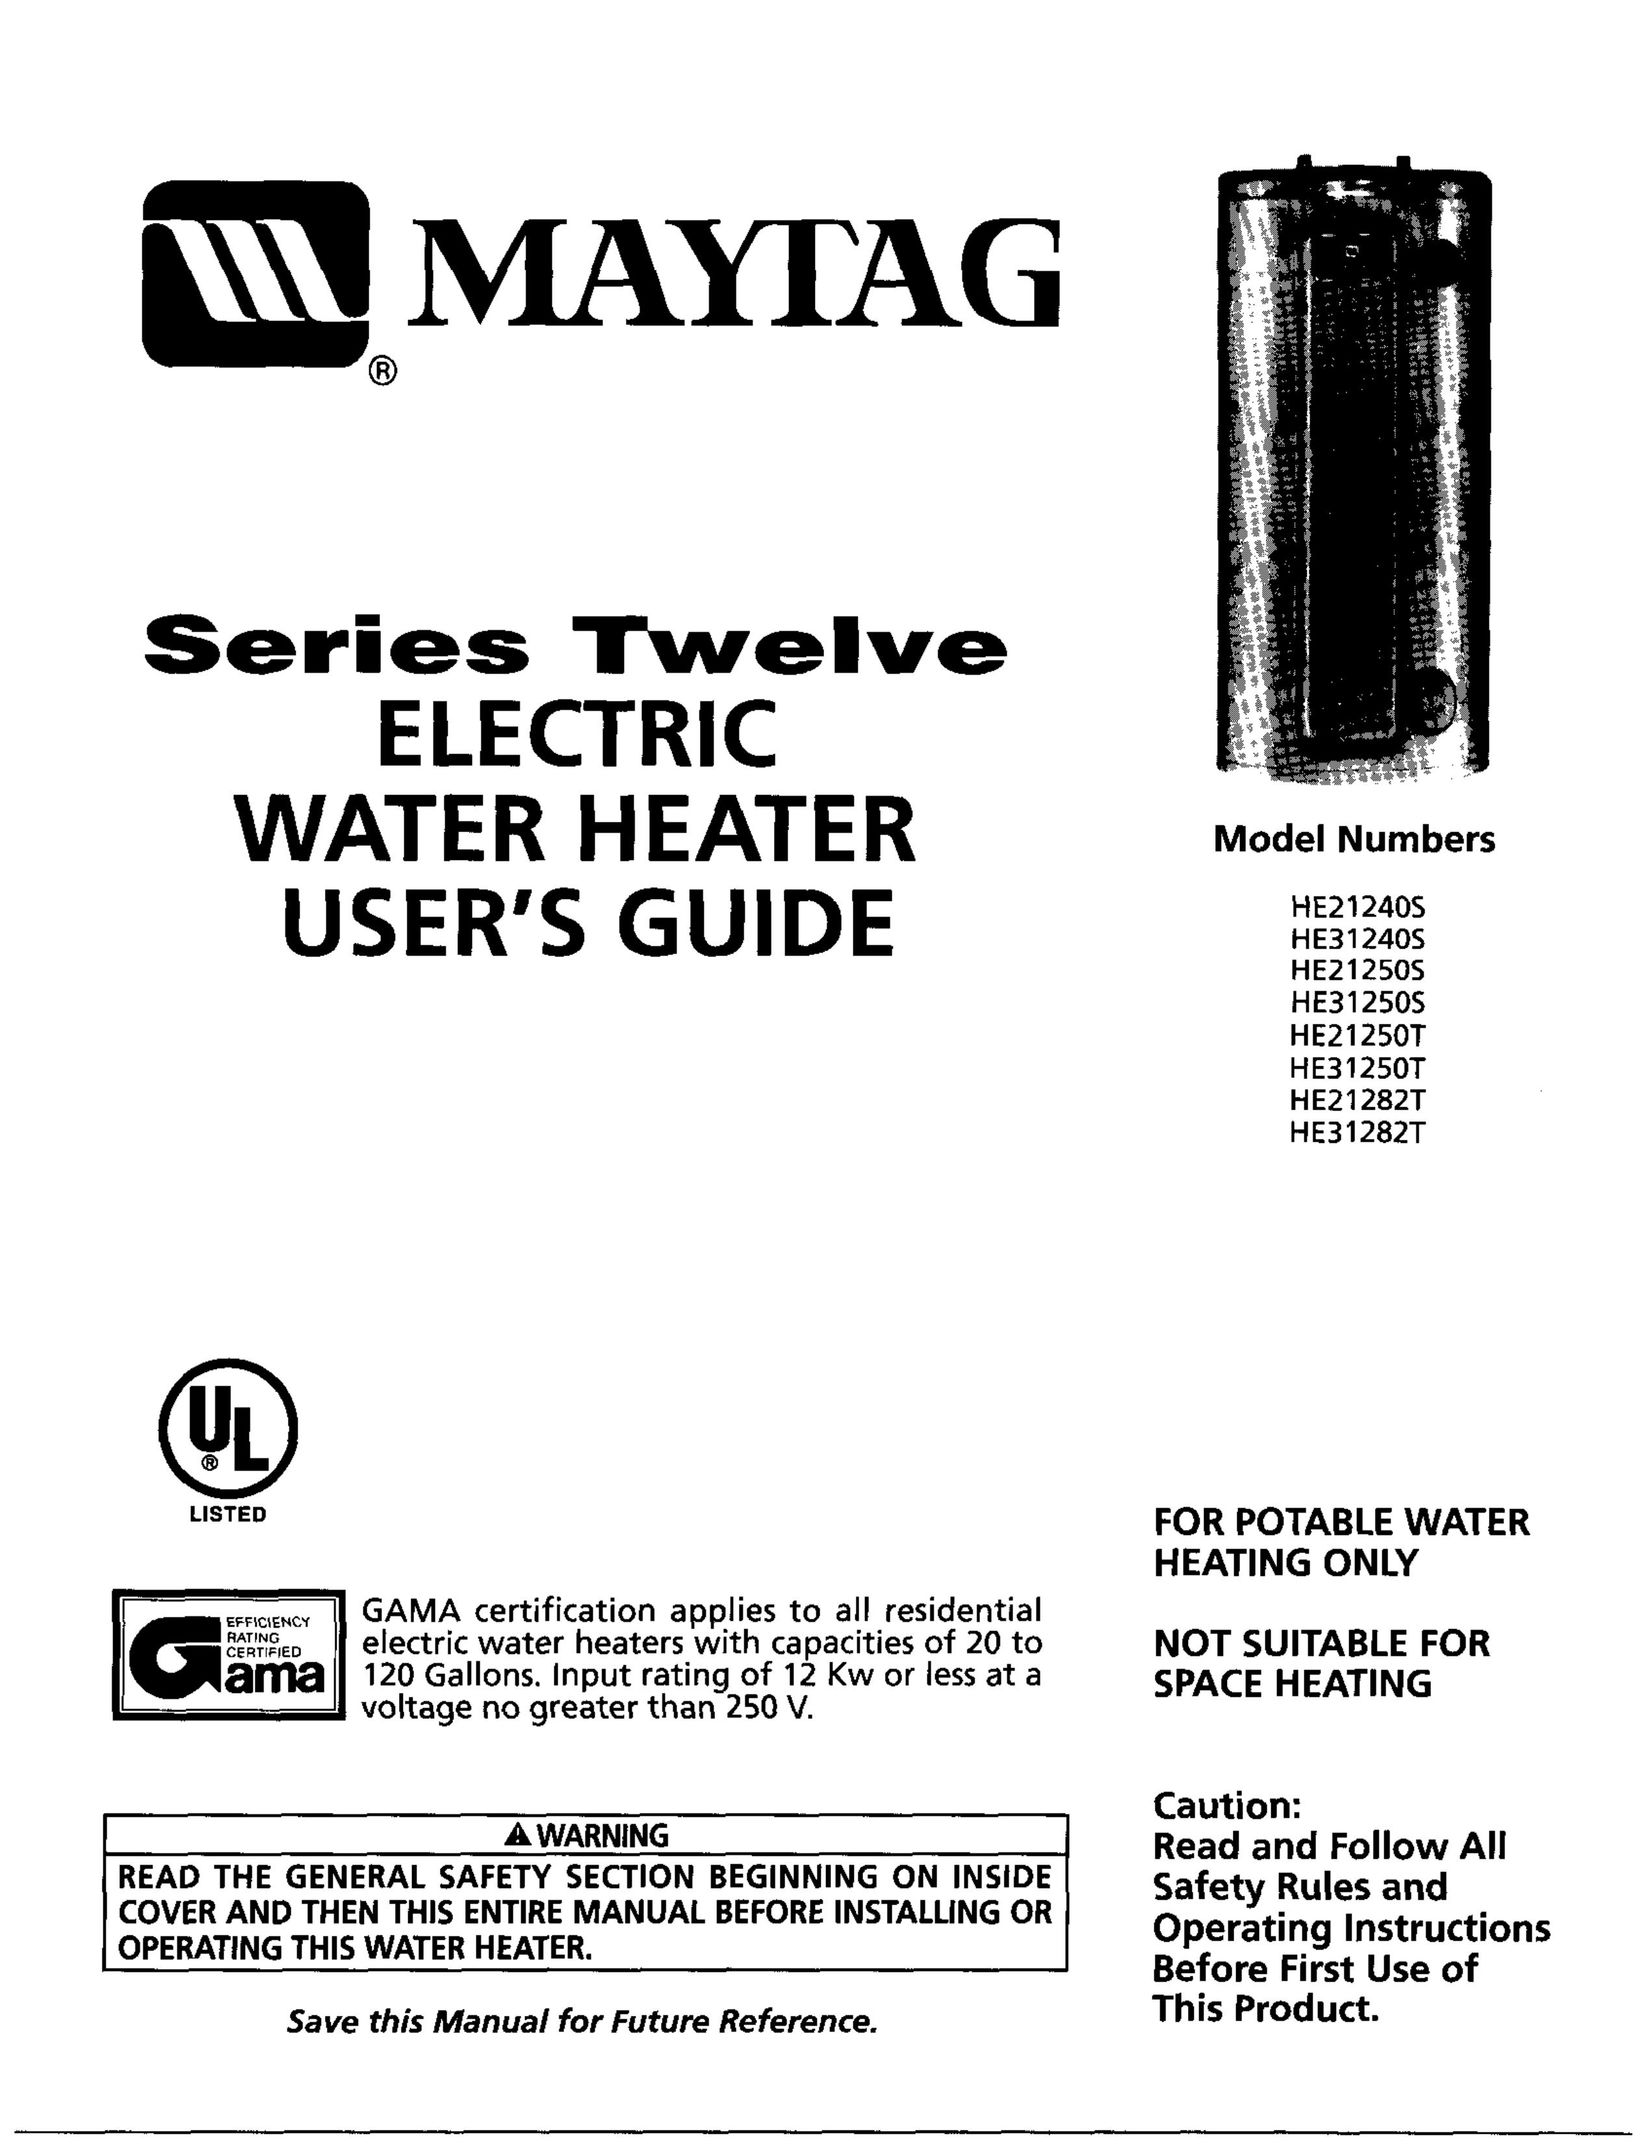 Maytag HE21282T Water Heater User Manual